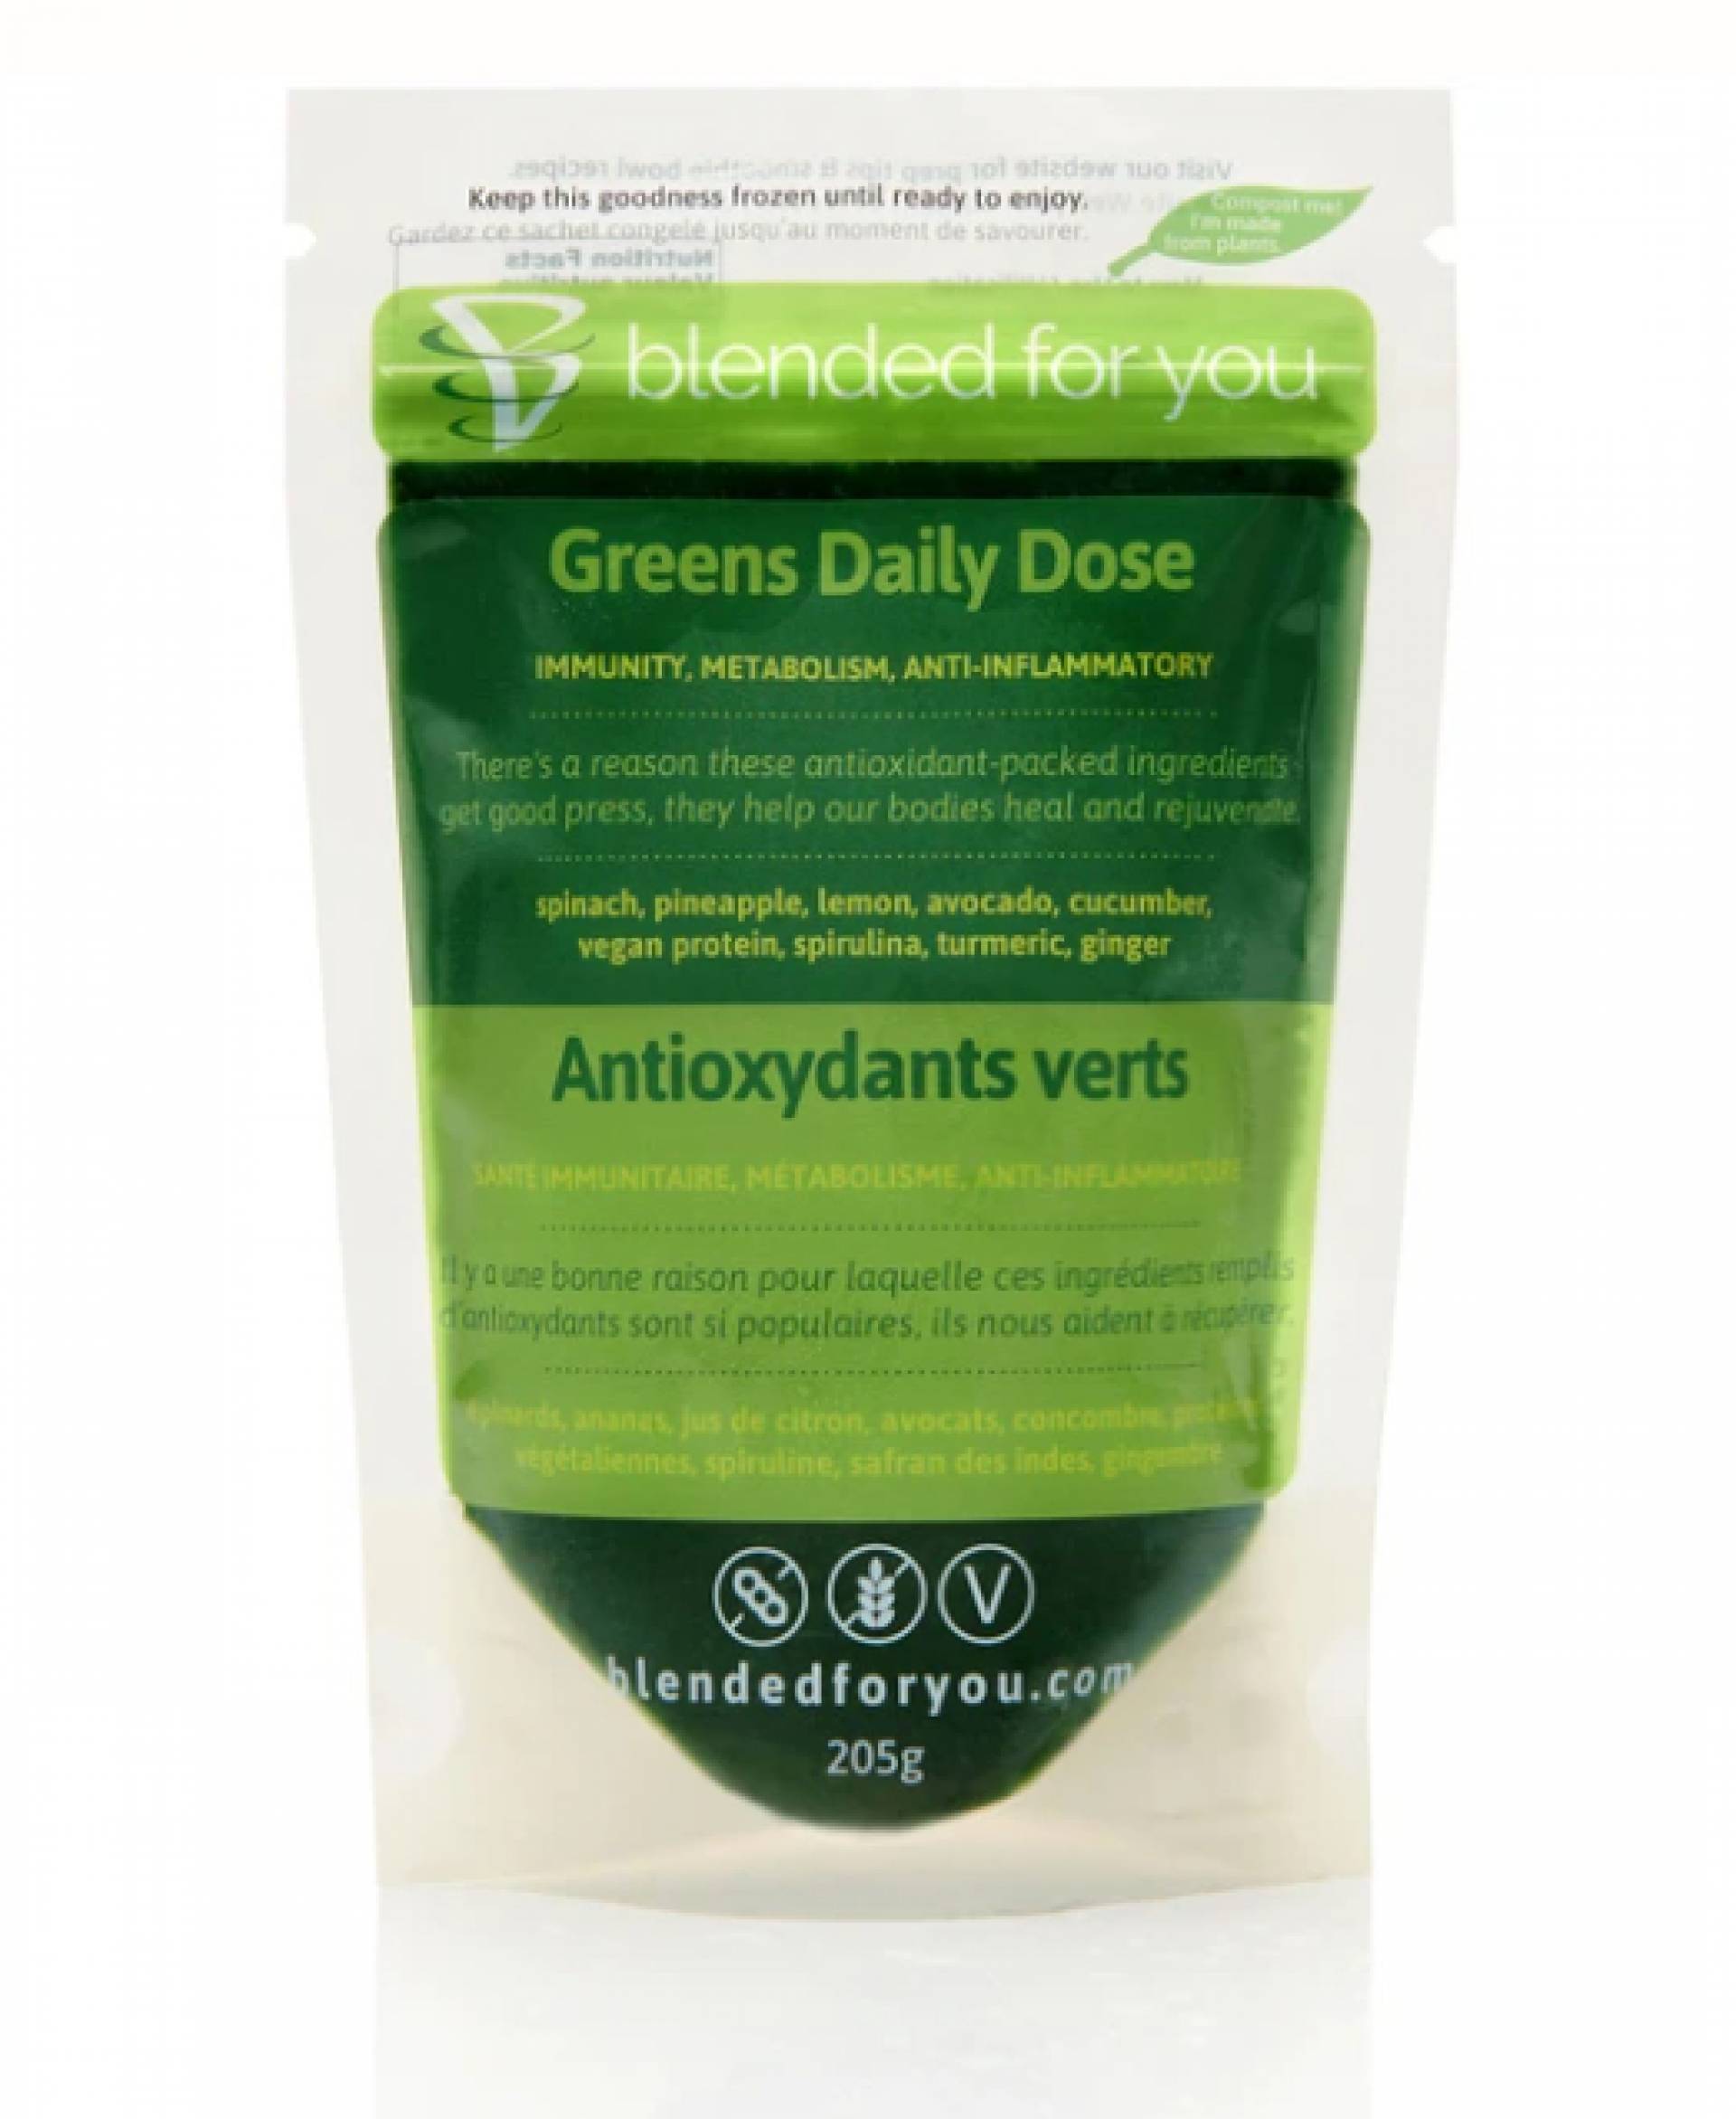 The Greens Daily Dose Smoothie